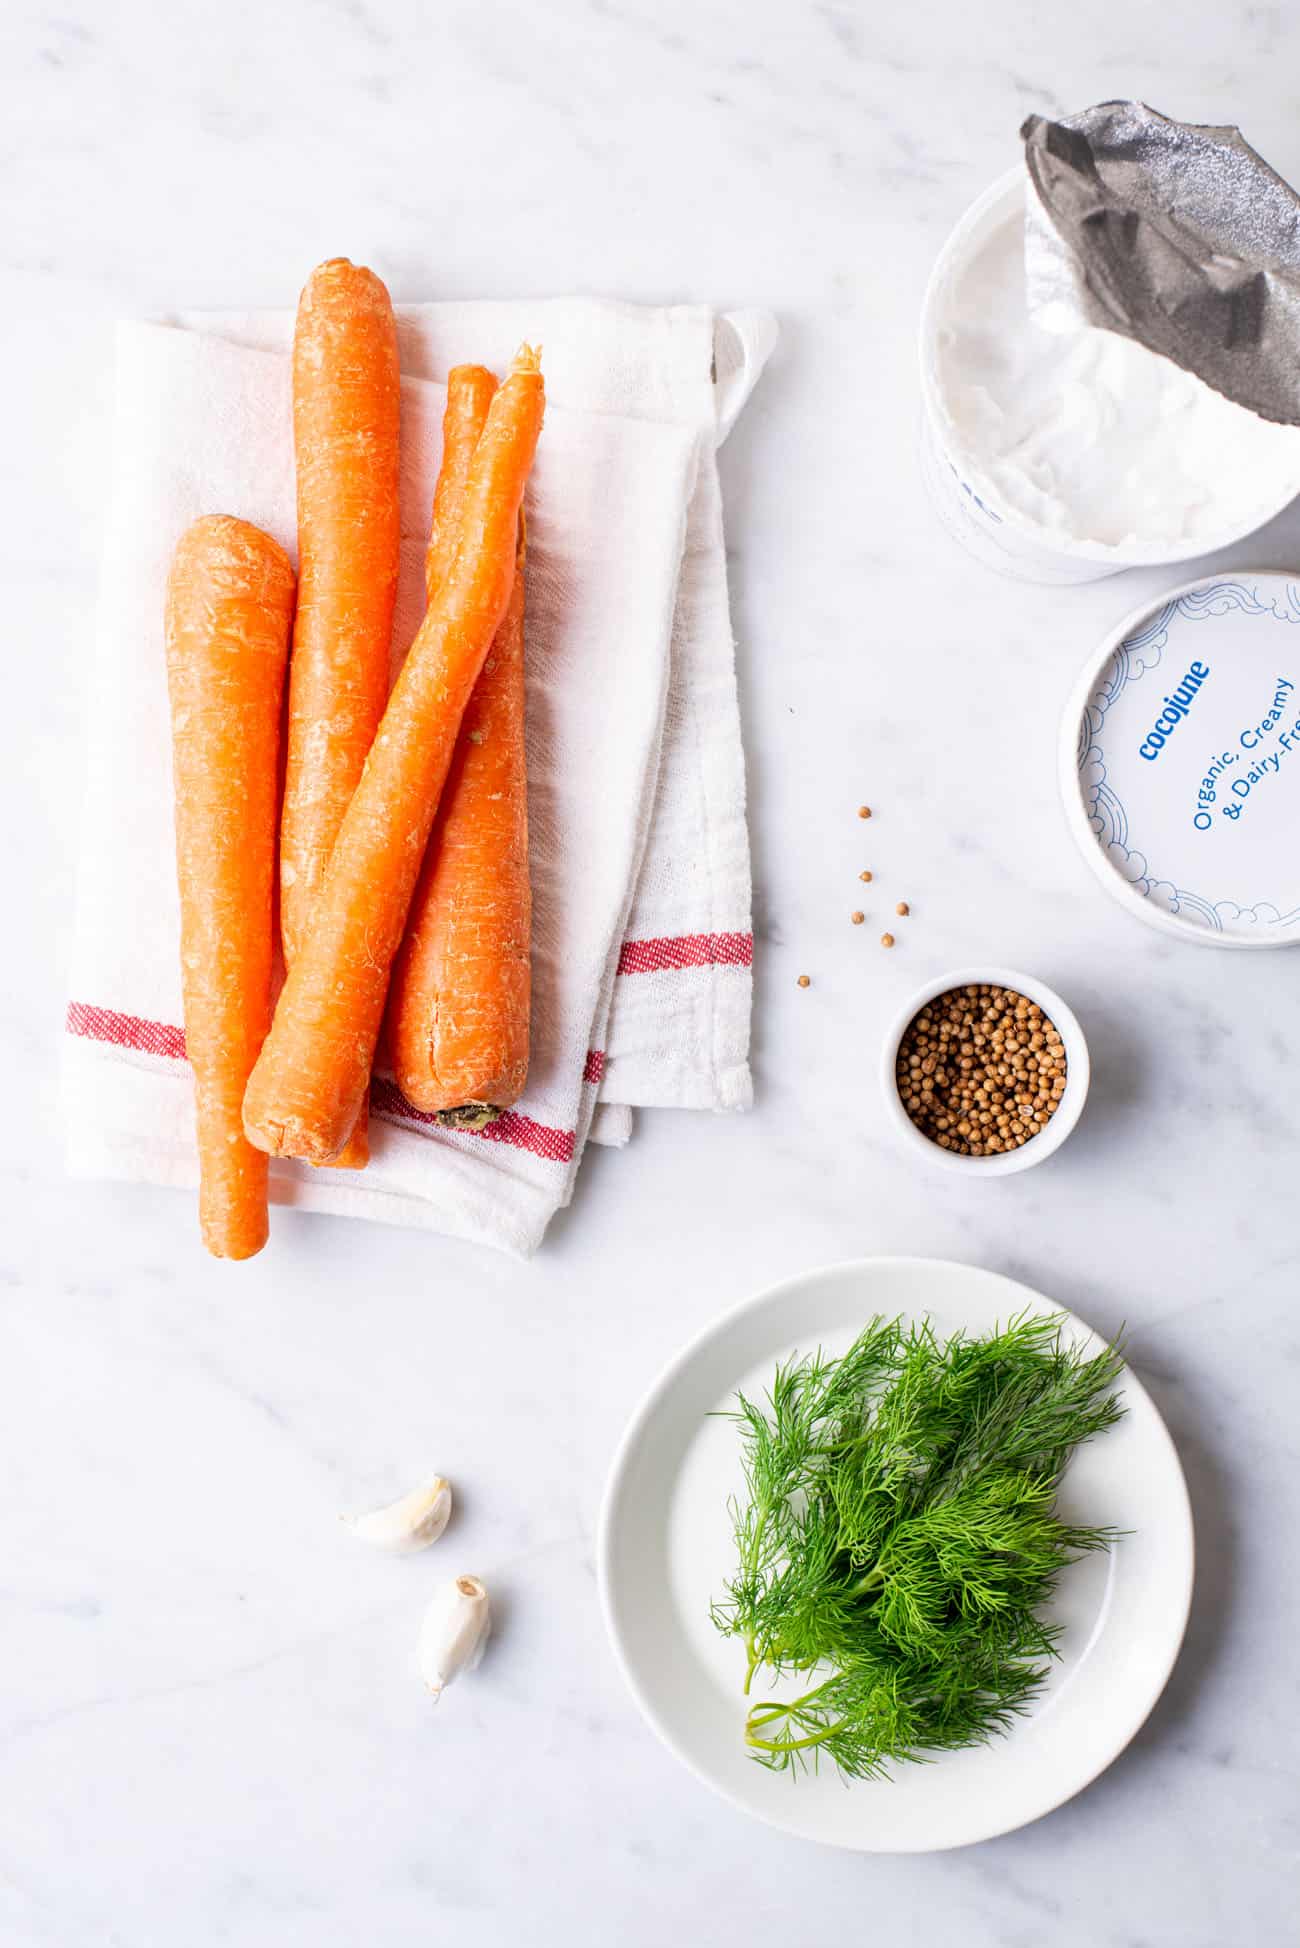 Carrots, vegan yogurt, coriander seeds, garlic cloves, and dill, gathered on a marble table